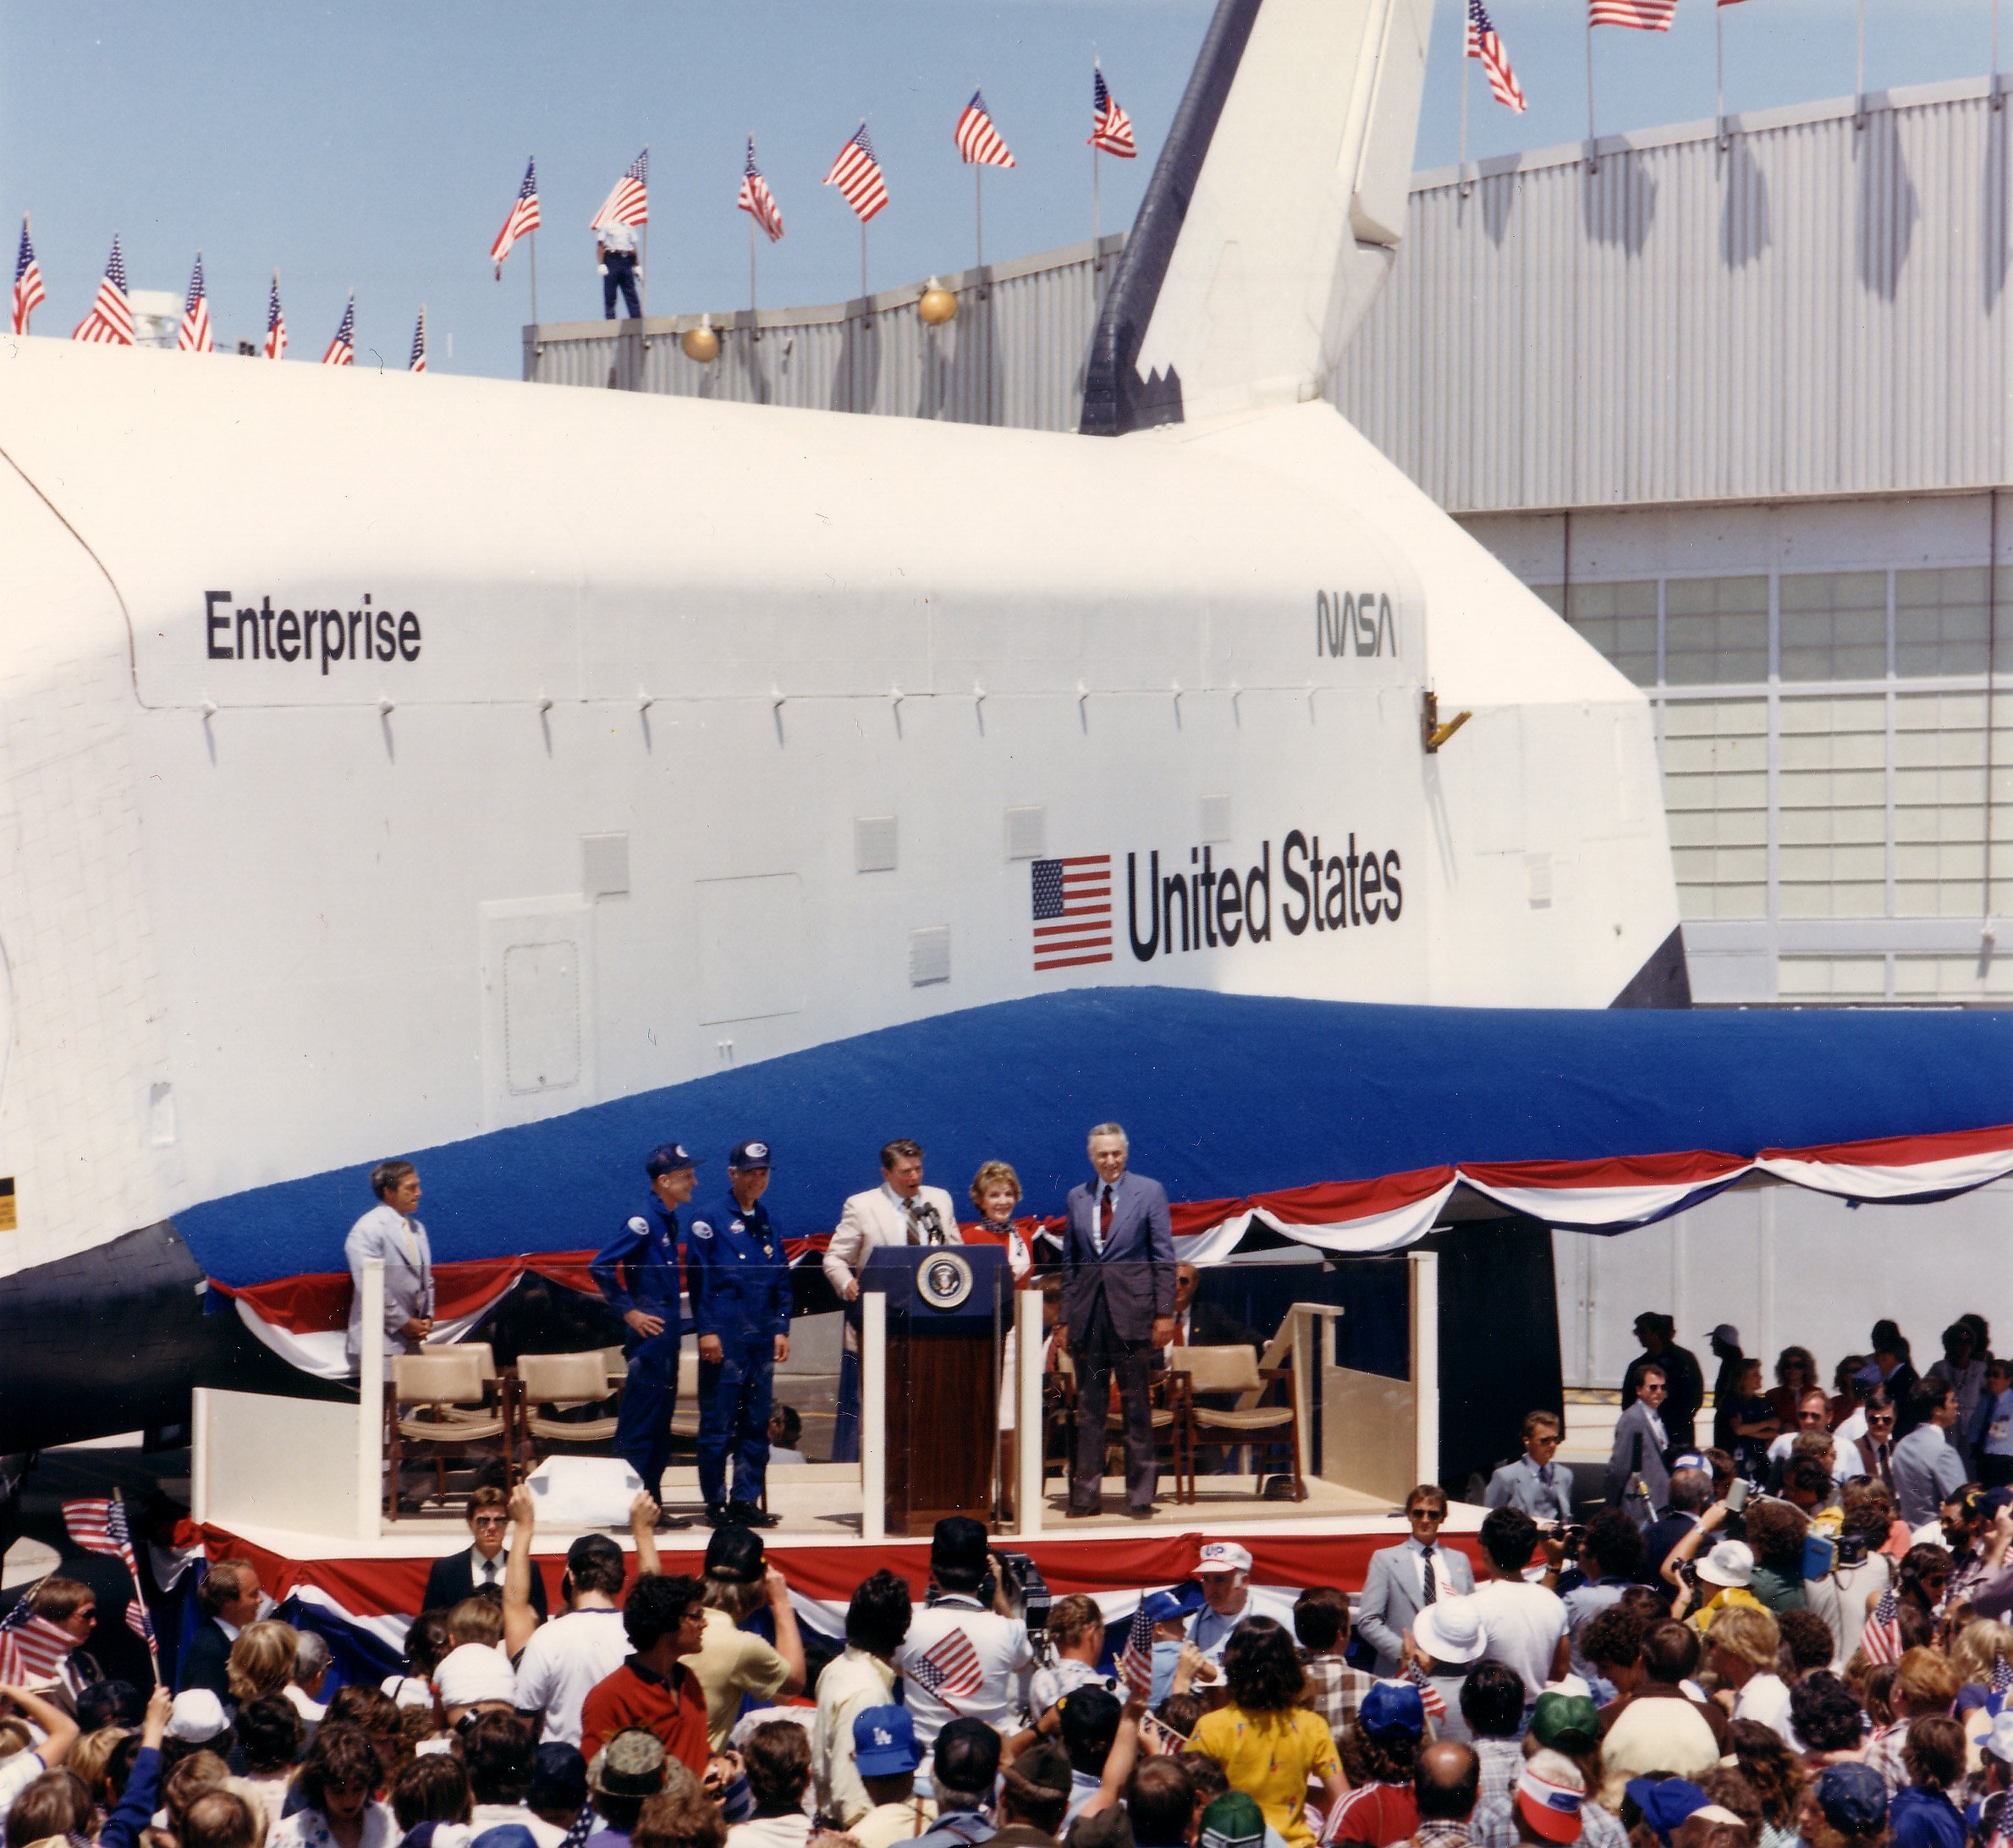 With space shuttle Enterprise as a backdrop, President Ronald W. Reagan, First Lady Nancy Reagan, and NASA Administrator James M. Beggs welcome home STS-4 astronauts Thomas K. “TK” Mattingly and Henry W. Hartsfield